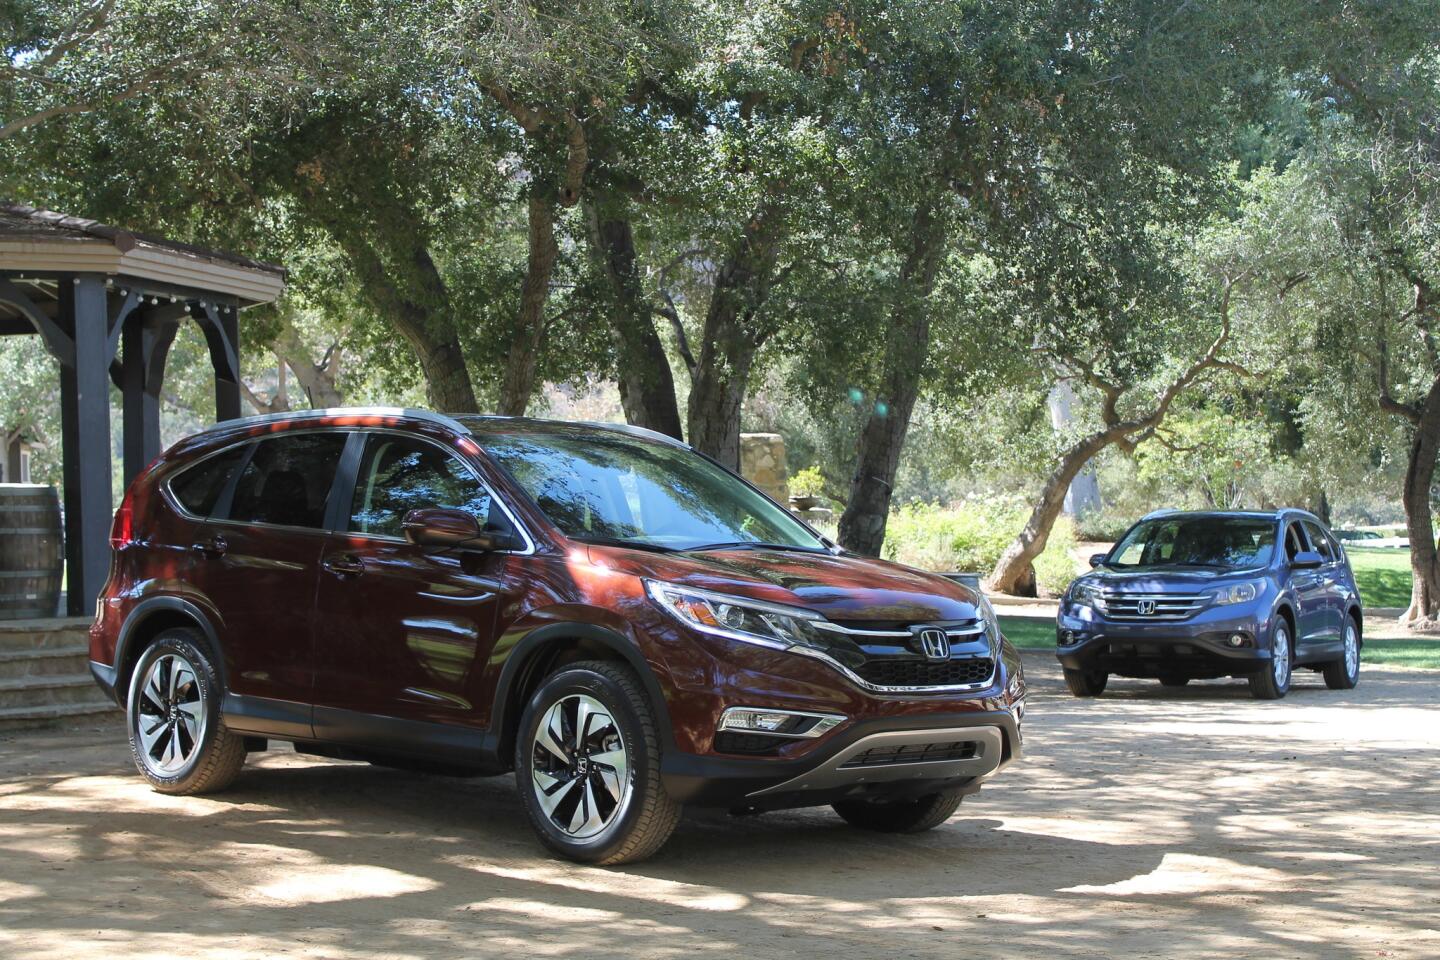 The 2015 Honda CR-V, left, parked next to a 2014 model, showing the subtle changes Honda made to the crossover's exterior.